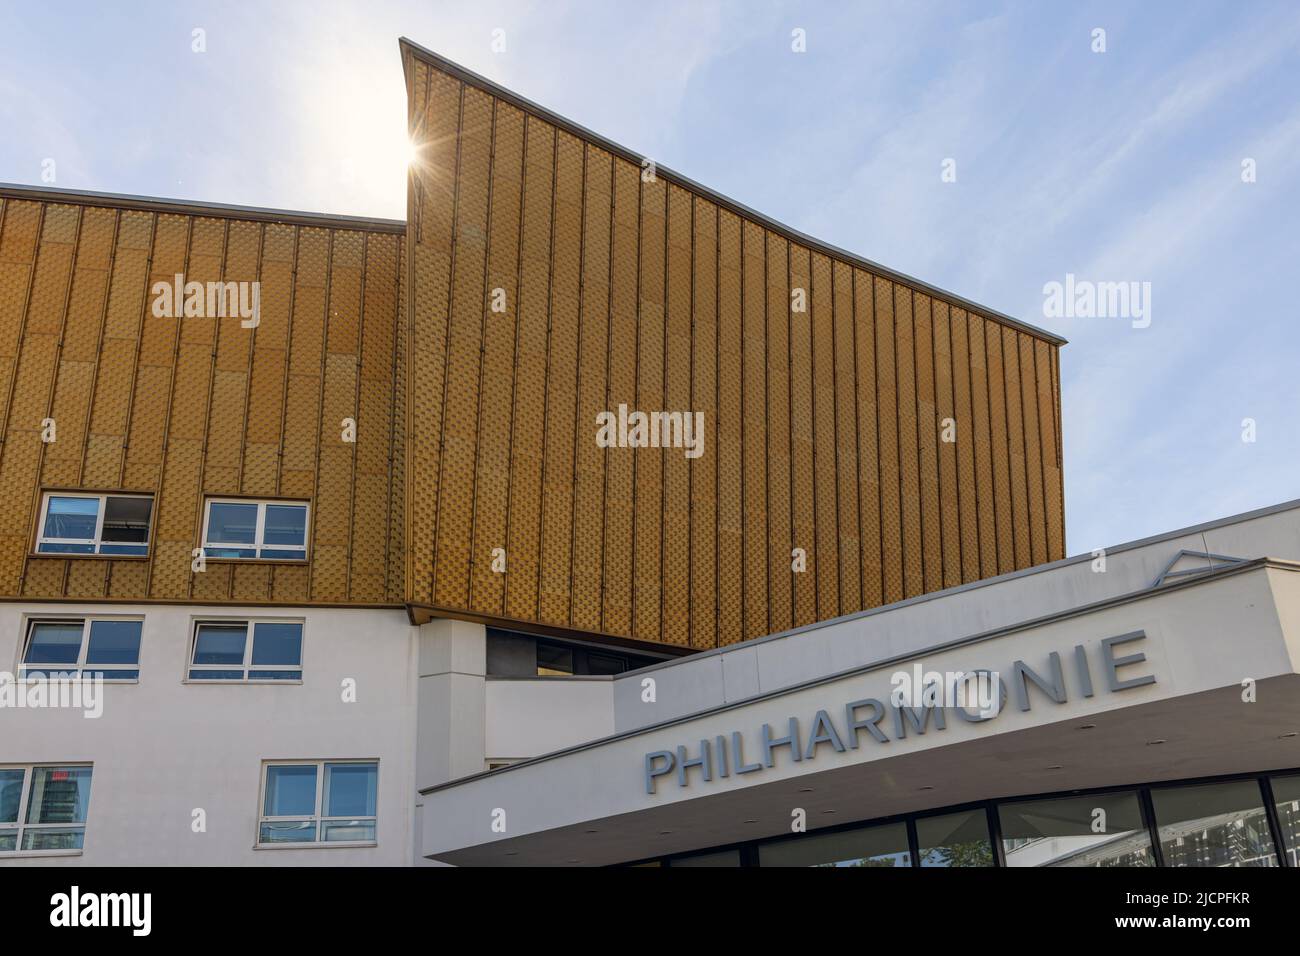 Berlin Philharmonic concert hall, designed by architect Hans Scharoun, home of Berlin Philharmonic orchestra in Berlin, Germany Stock Photo